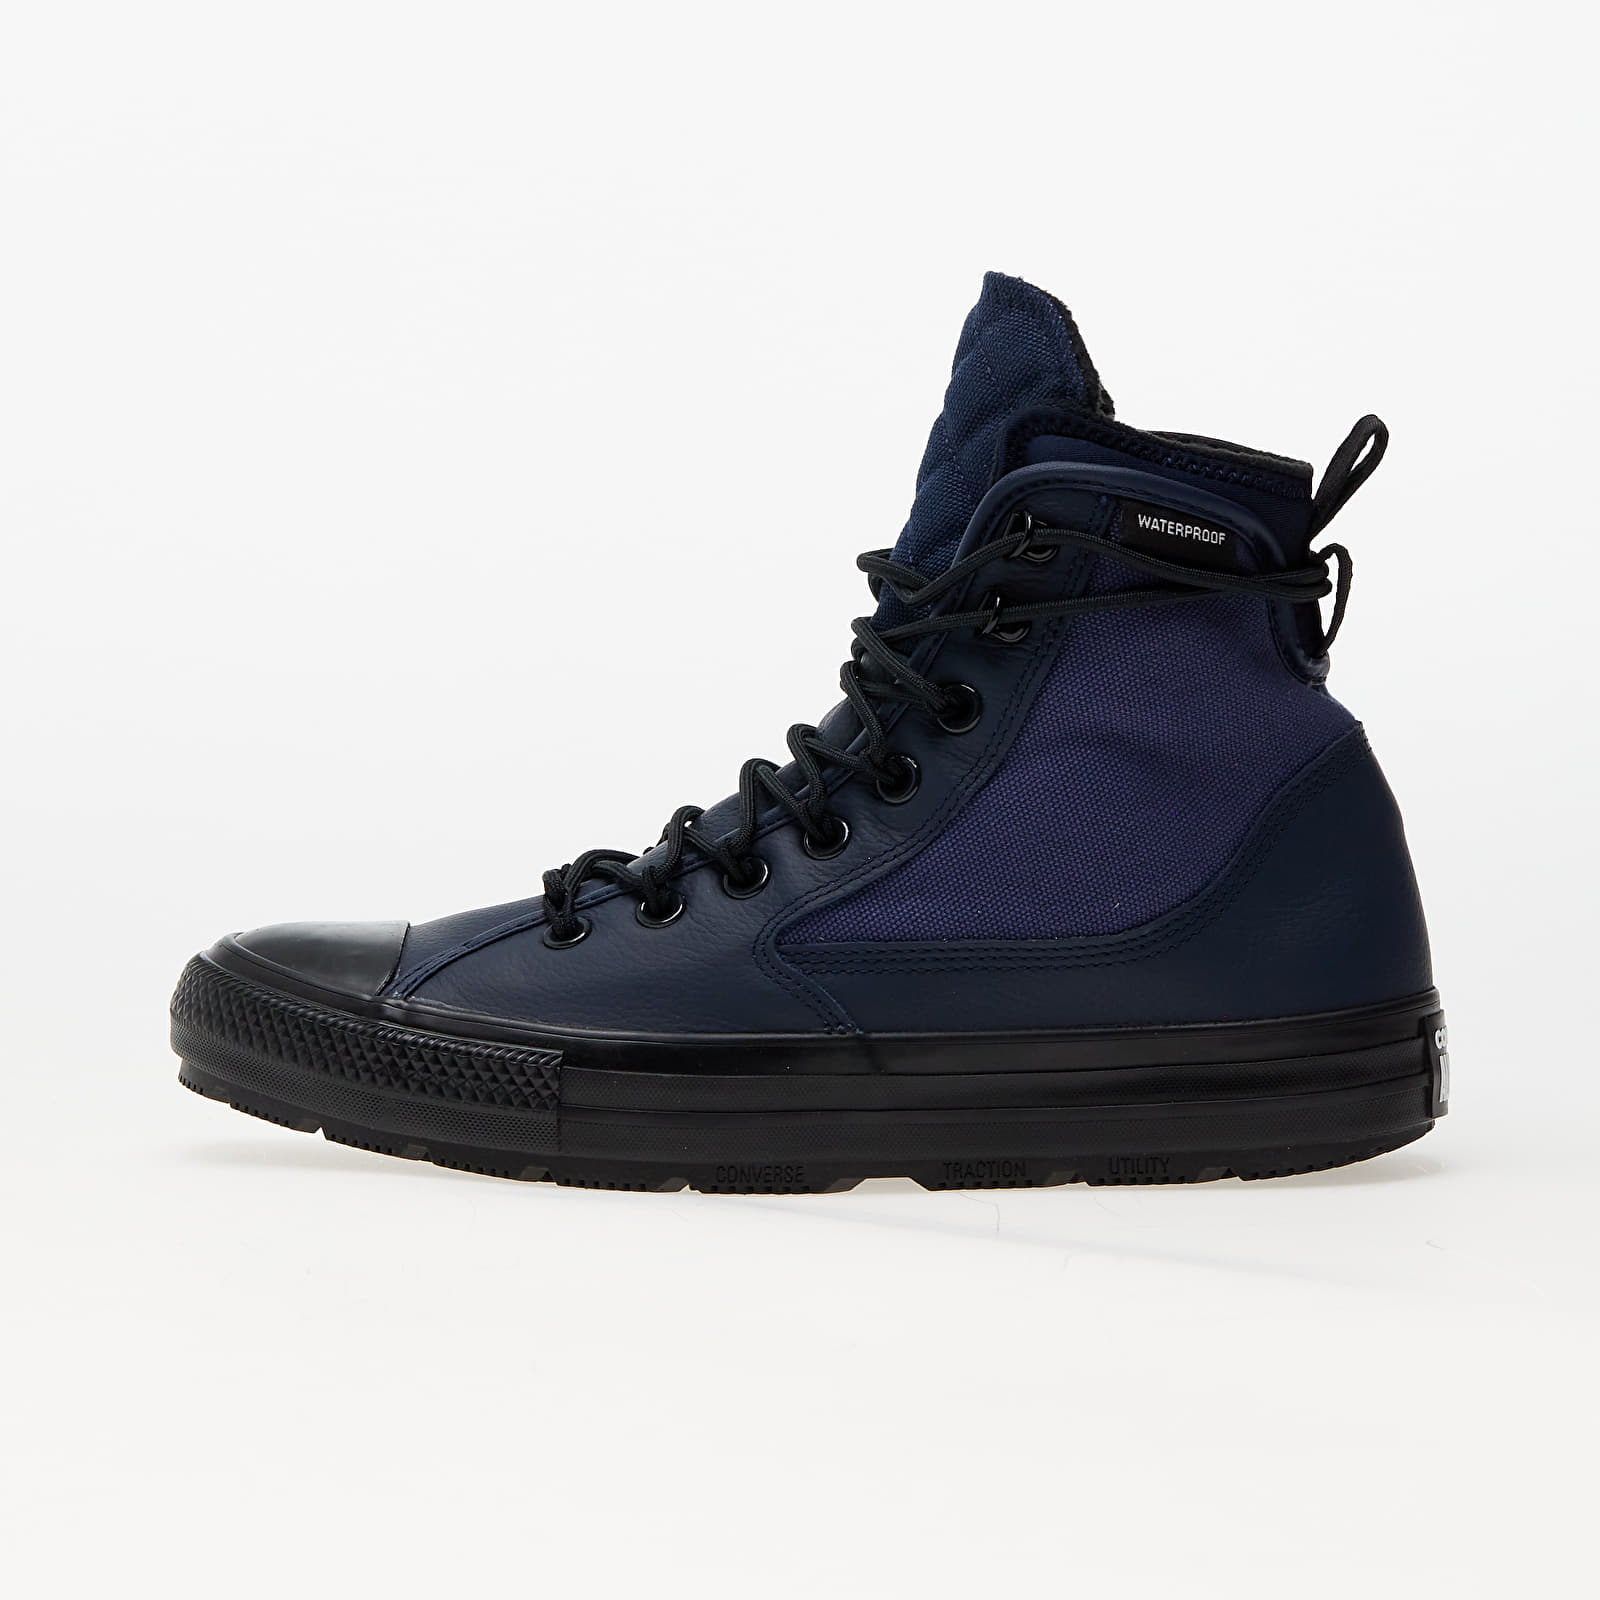 Men's shoes Converse Chuck Taylor All Star All Terrain Counter Climate Obsidian/ Uncharted Waters